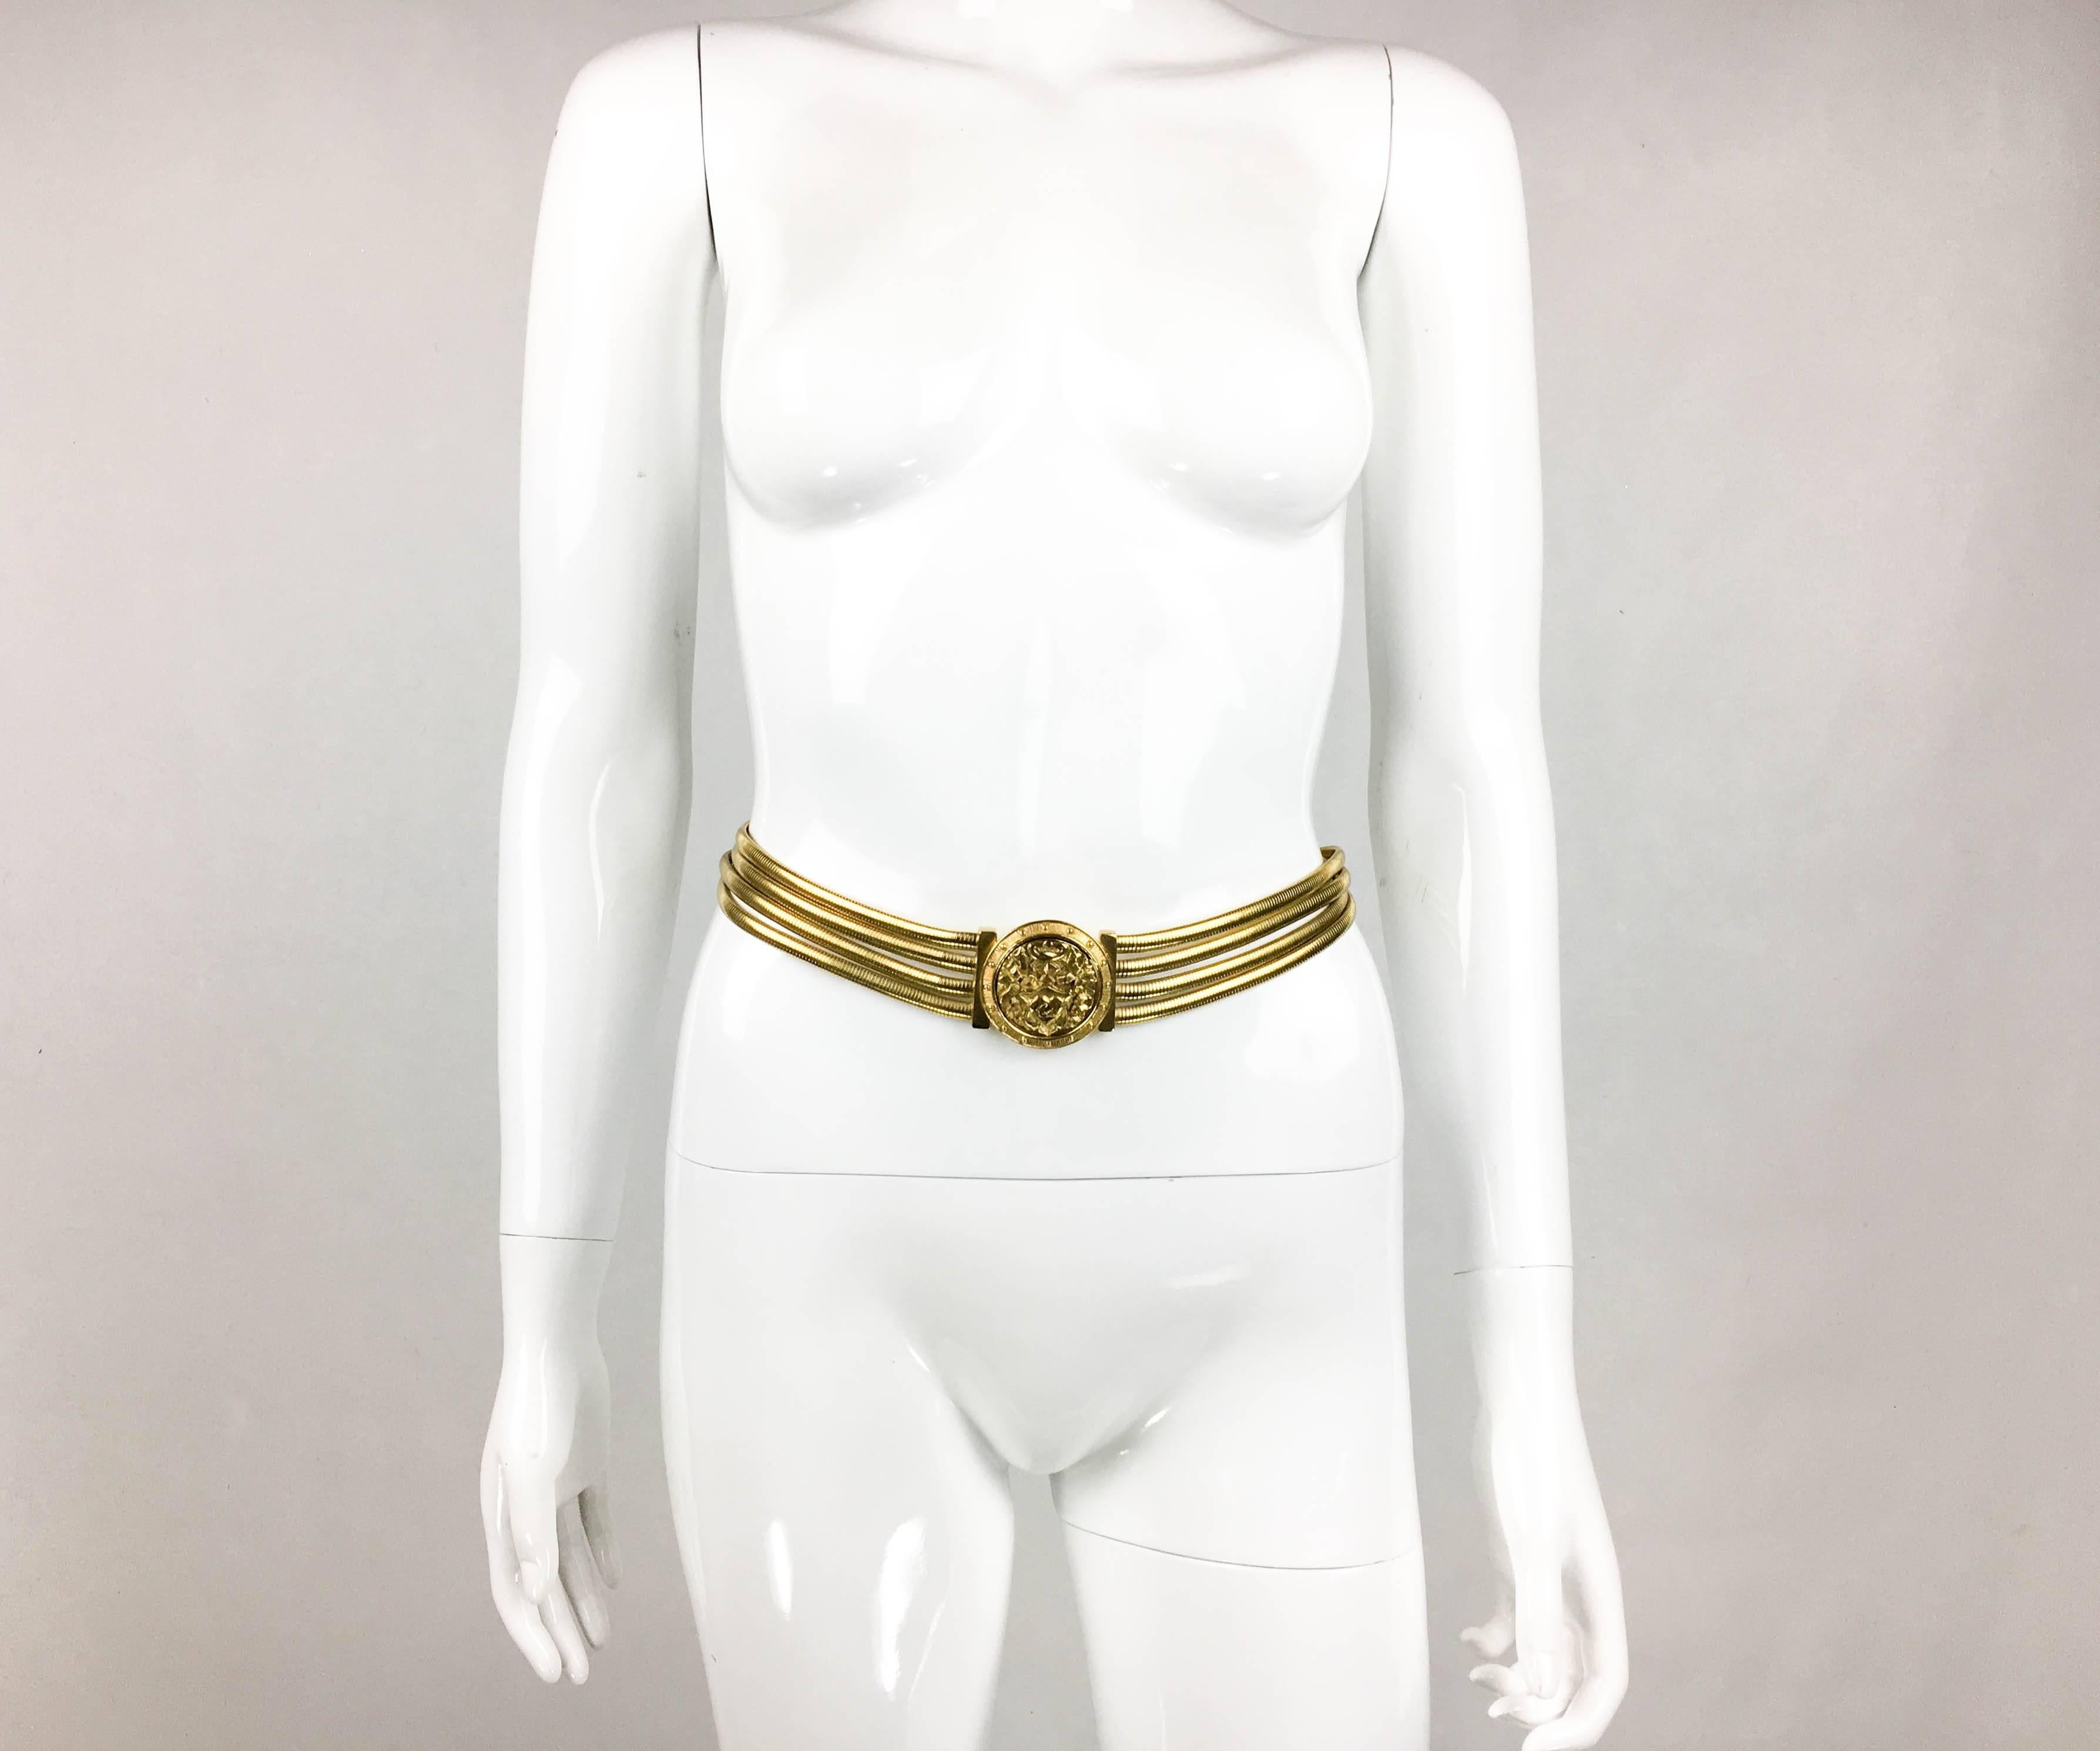 Vintage Christian Lacroix Gilded Belt. This gorgeous belt by Lacroix dates back from the late 1980’s. Made in gilt metal, it features 4 snake chains as the body of the belt. The buckle is medallion-style with intricate design. Packed with glamour